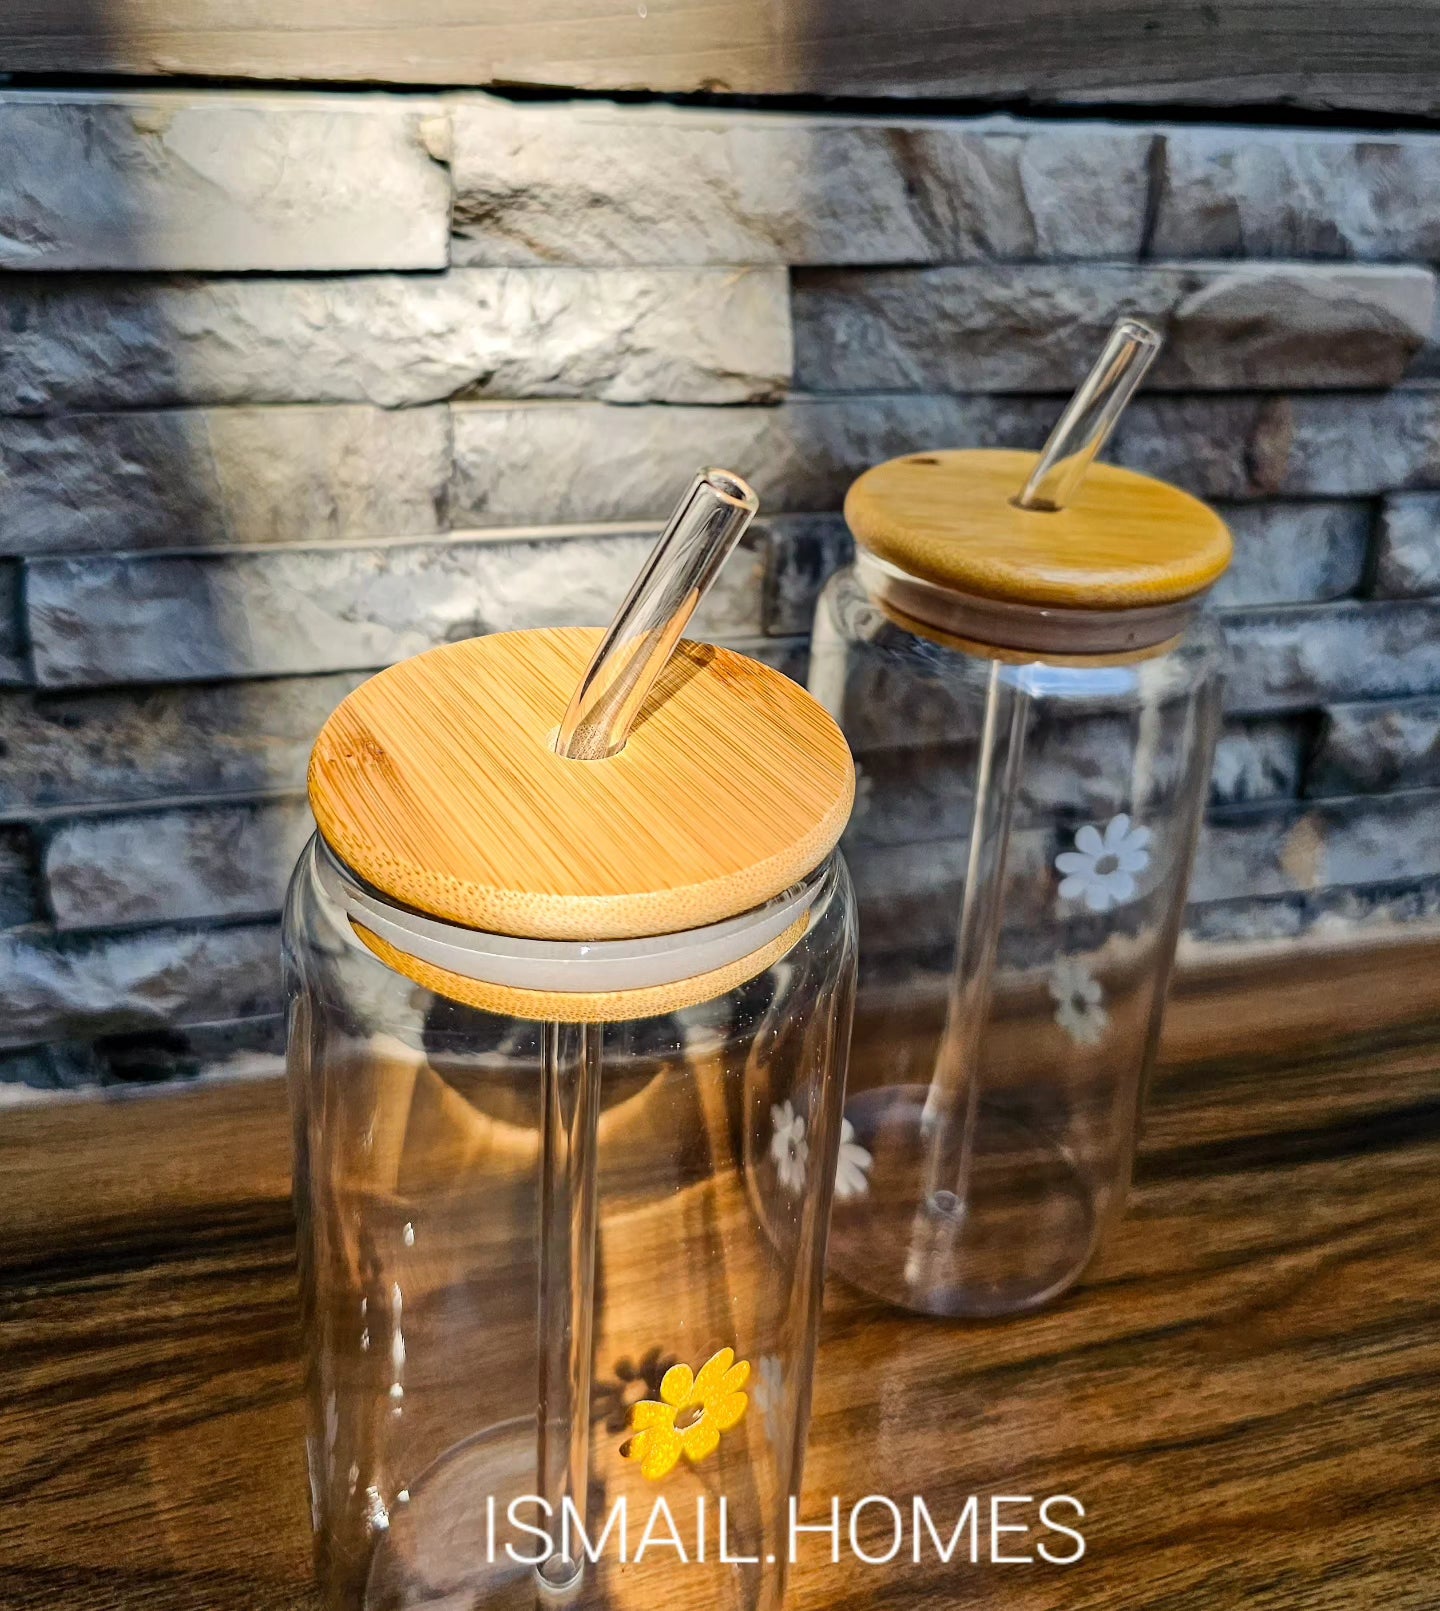 550ML Can Glass with Lid and Glass Straw - Daisy